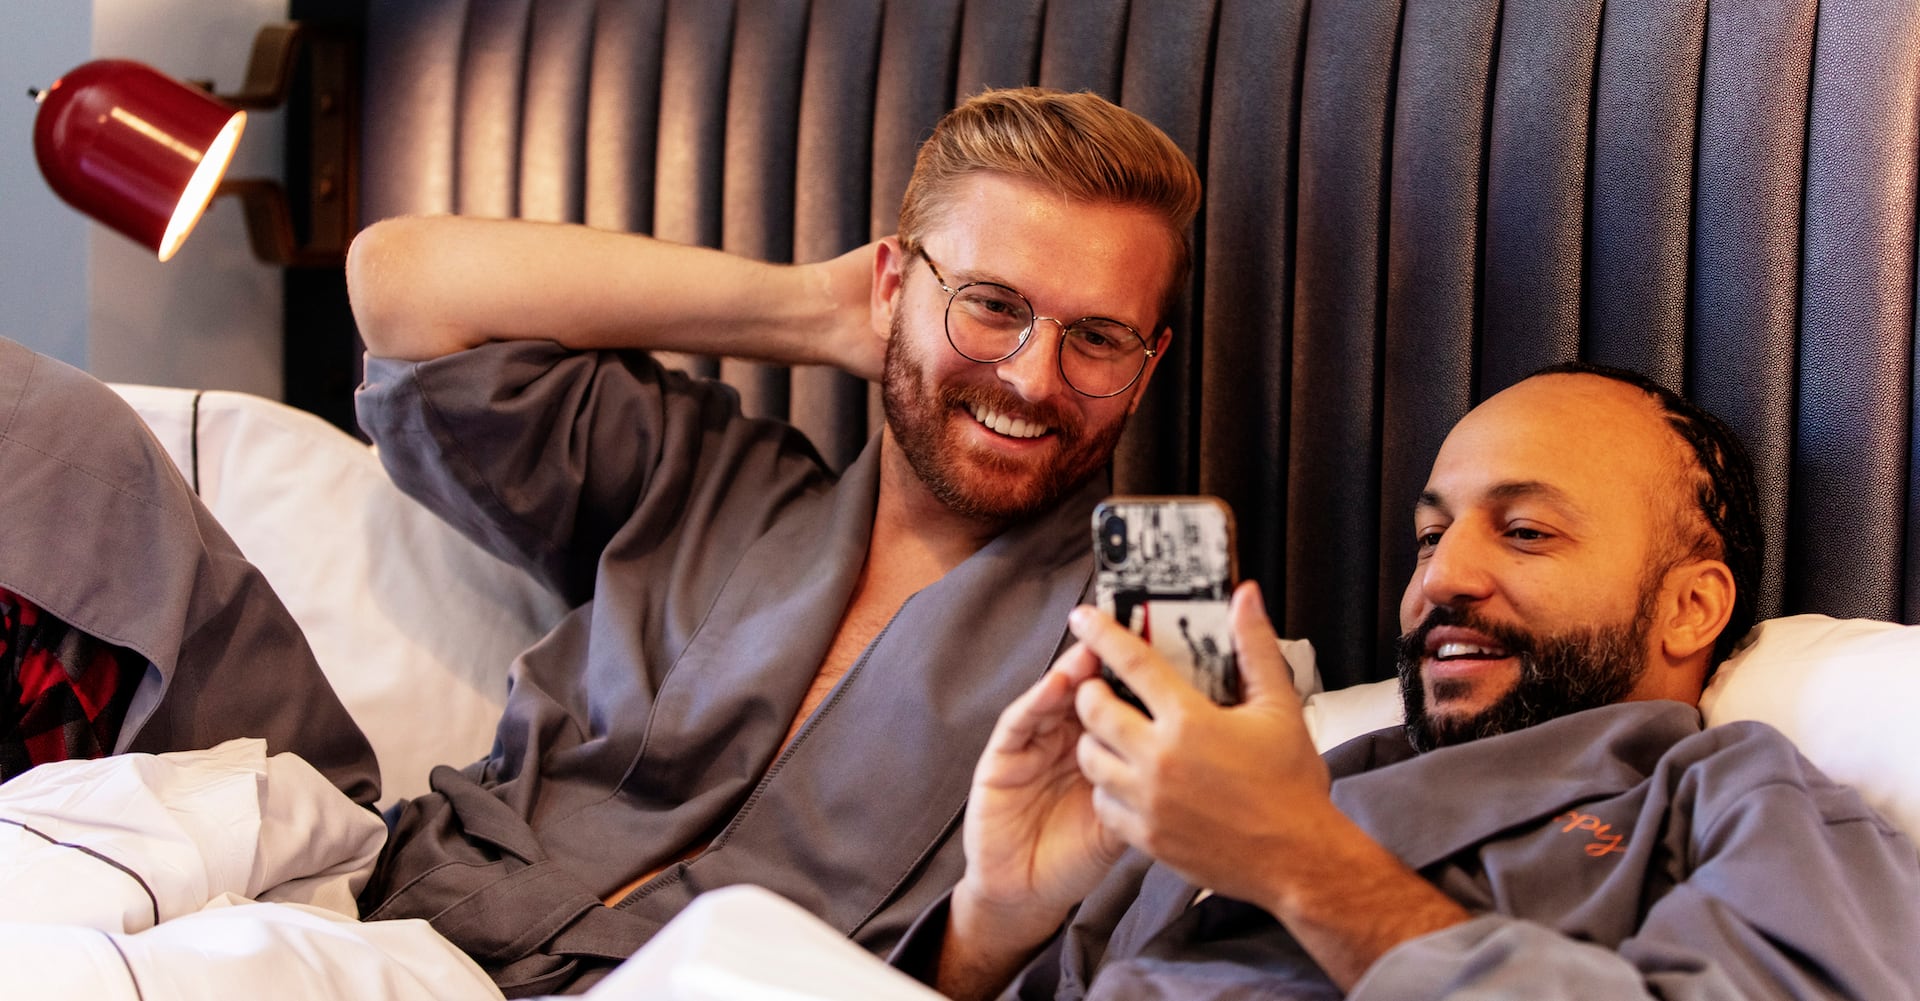 Two men in bed laughing and smiling at something on the cell phone